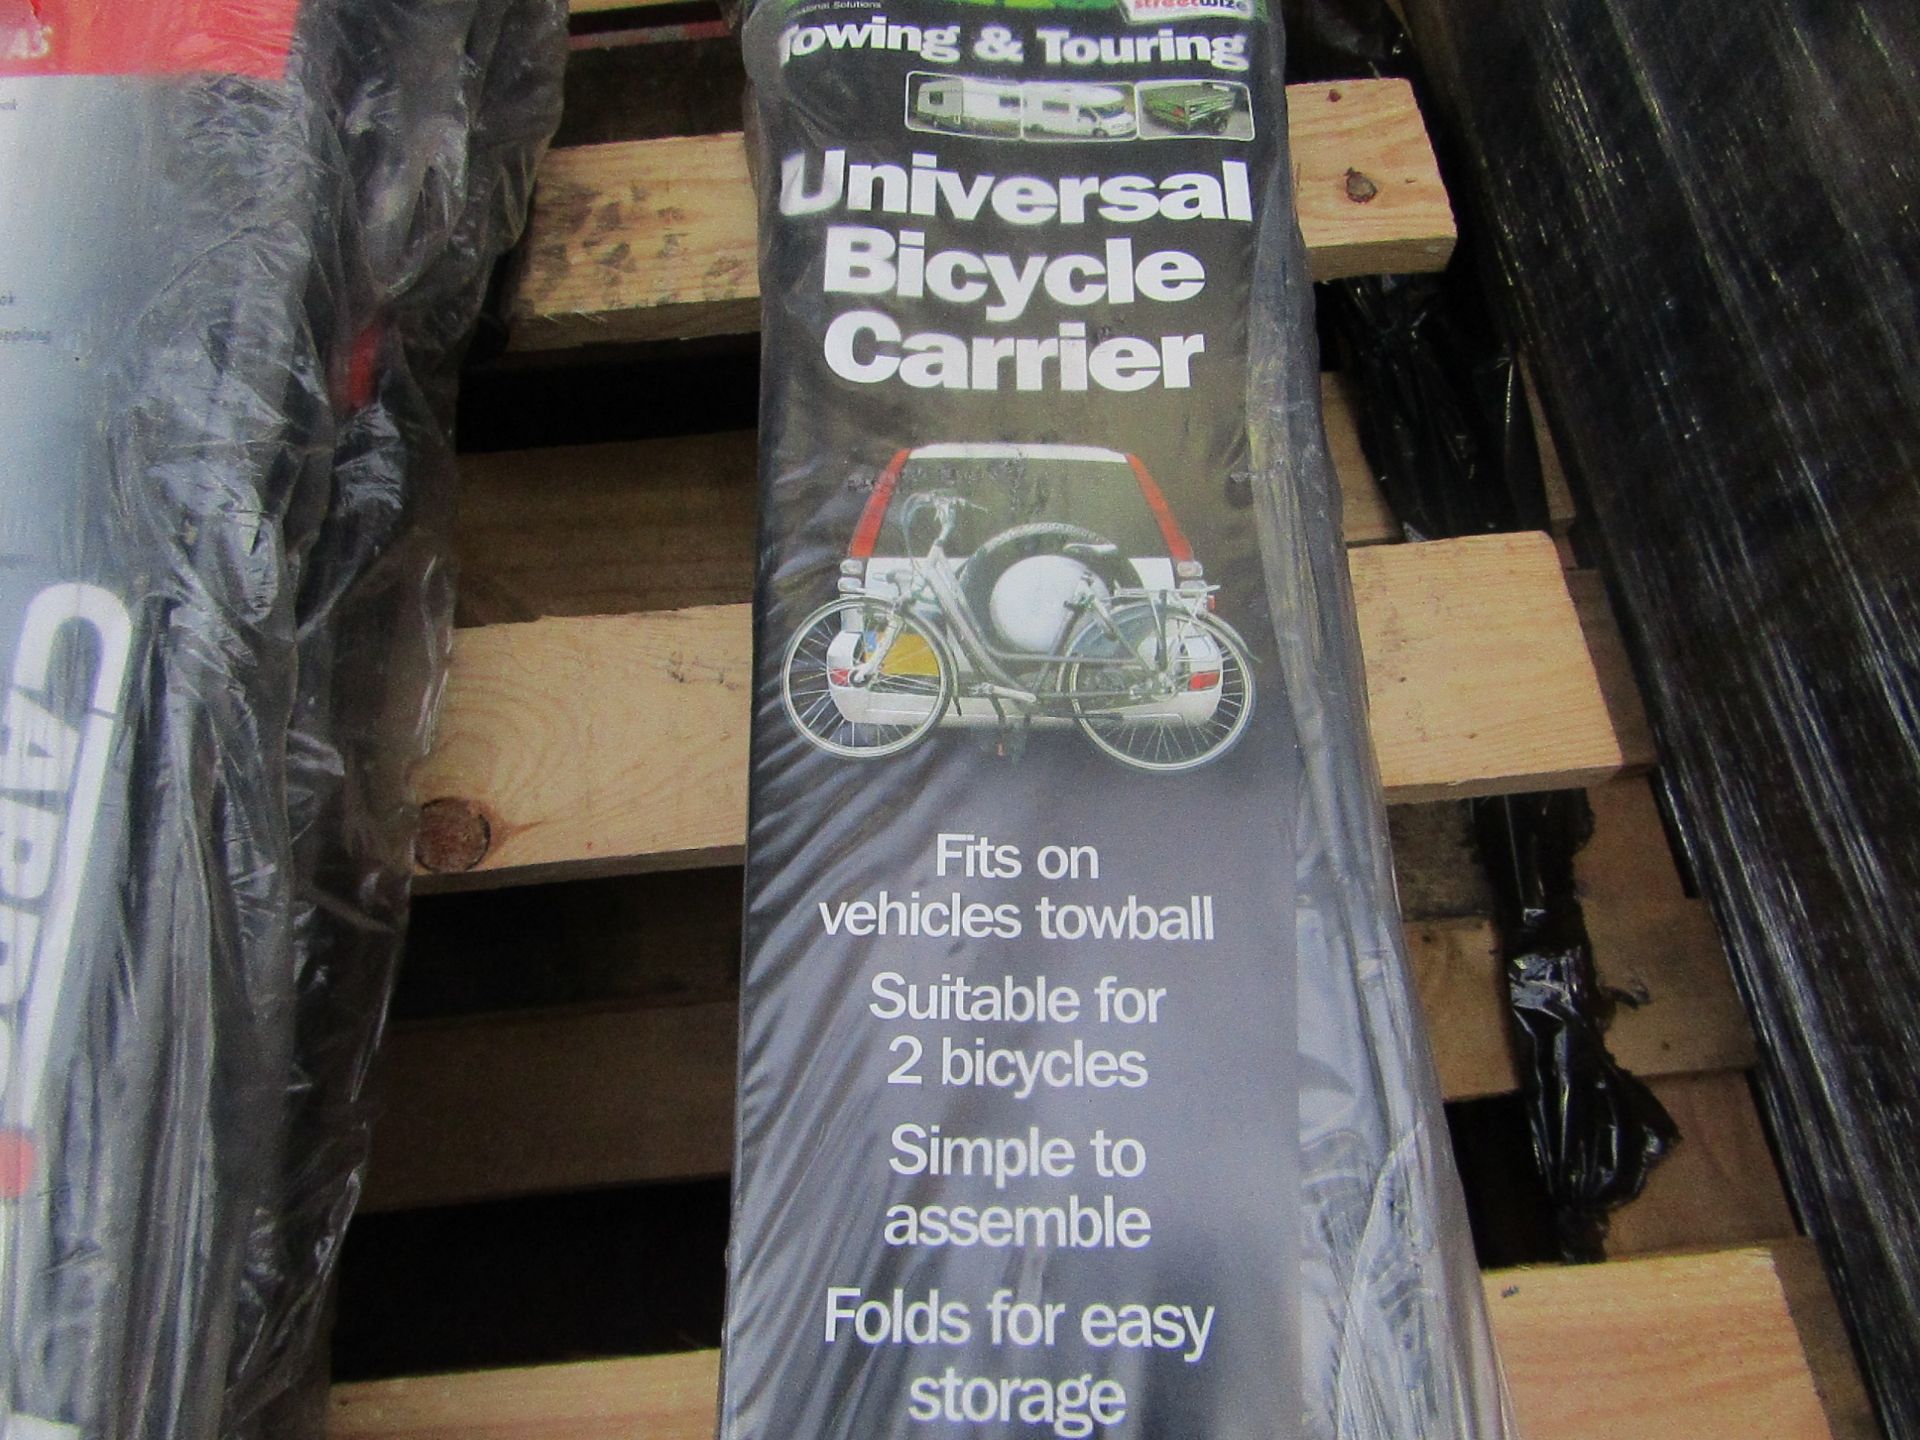 StreetWize - Towing & Touring Universal Bicycle Carrier - Unchecked & Packaged.